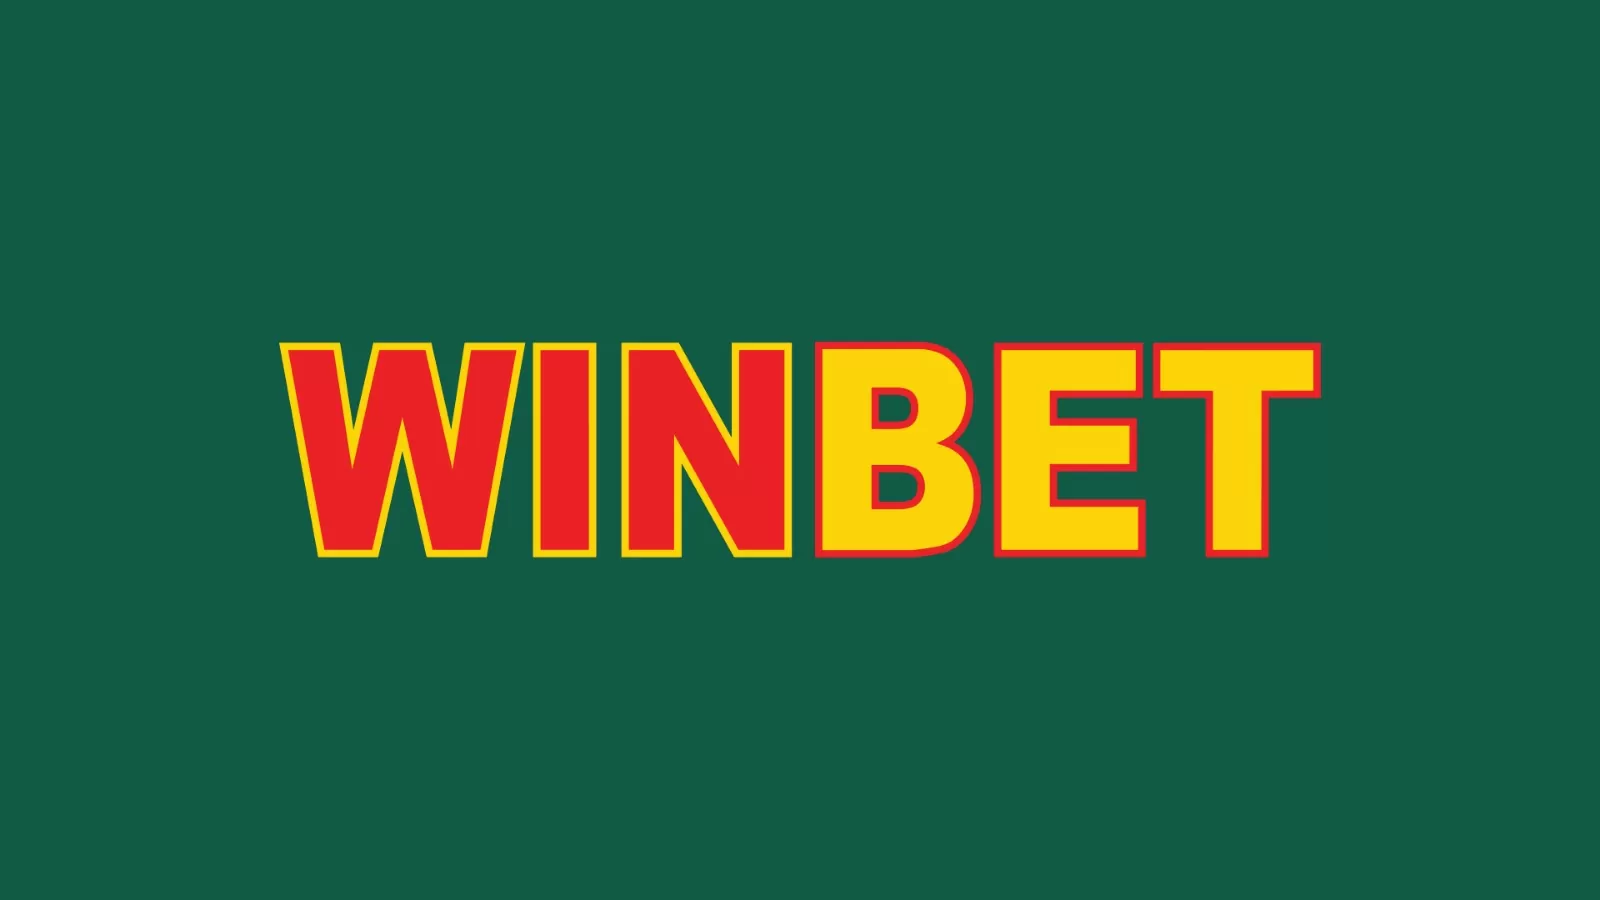 Read These 7 Tips About Winbet Club To Double Your Business